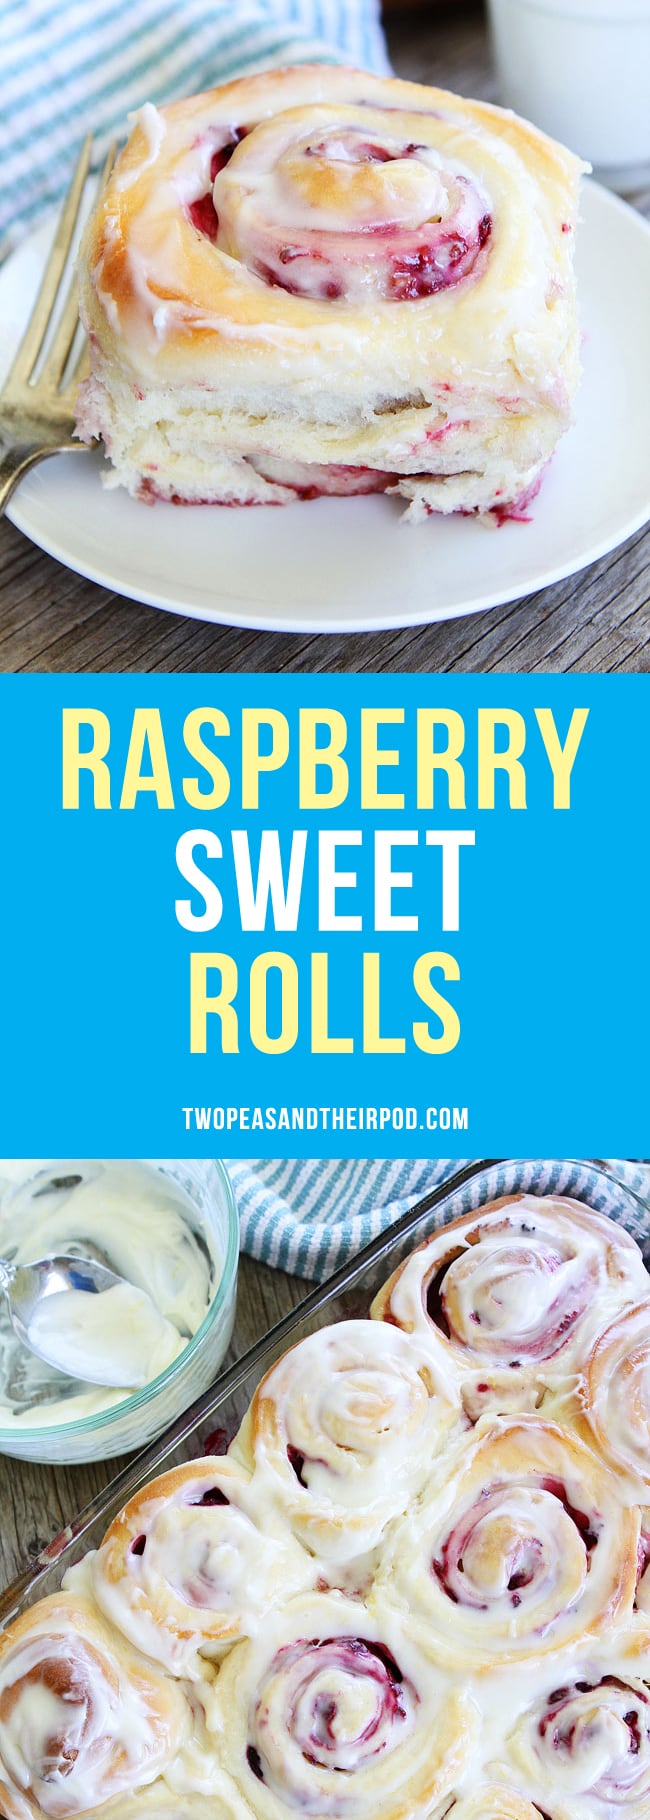 Raspberry Sweet Rolls are the perfect breakfast or brunch treat for the holidays or any day! #cinnamonrolls #breakfast #holidays Visit twopeasandtheirpod.com for more simple, fresh, and family friendly meals.